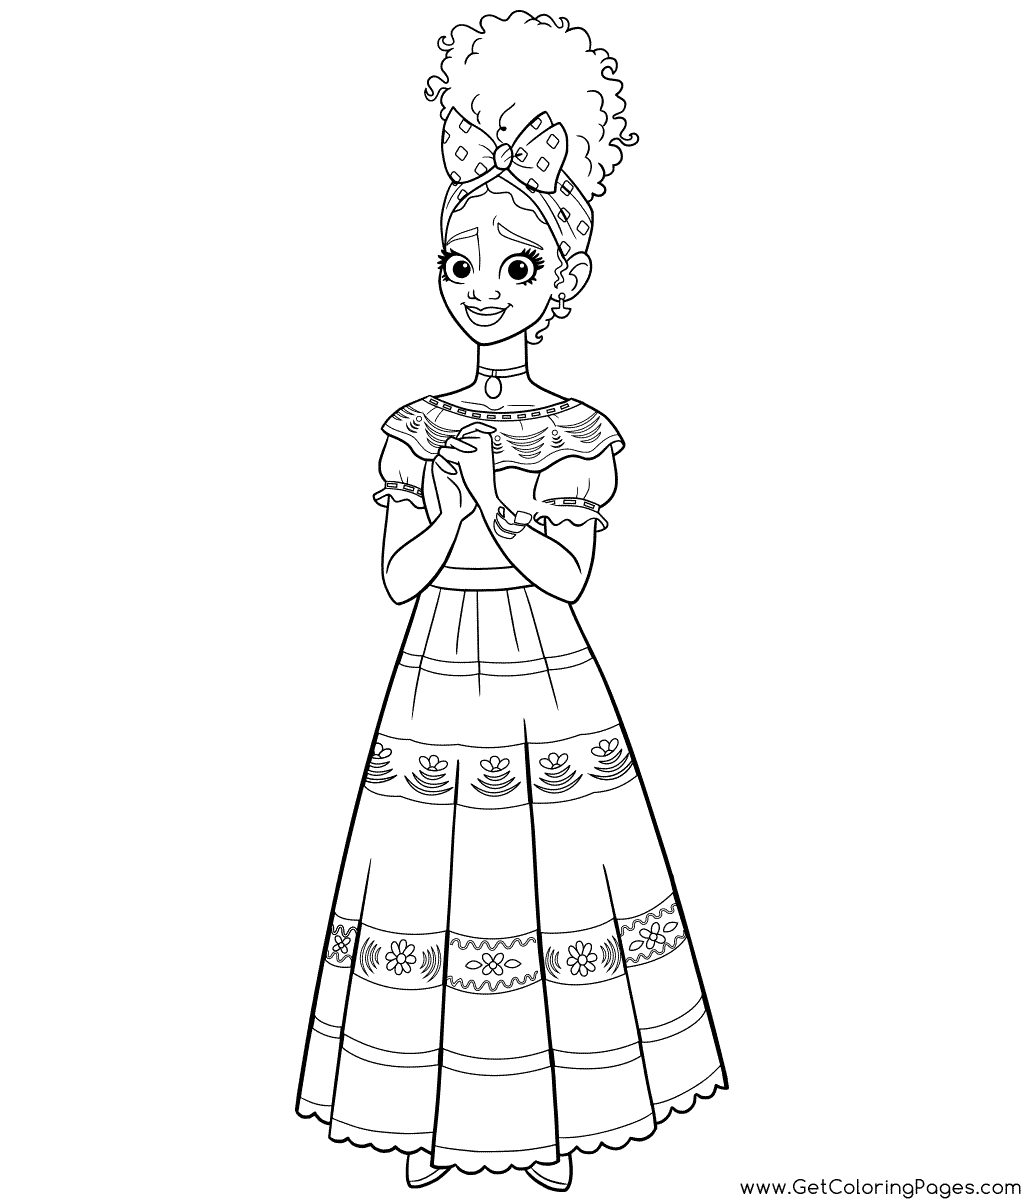 Encanto Dolores Colouring Pages - Get Coloring Pages